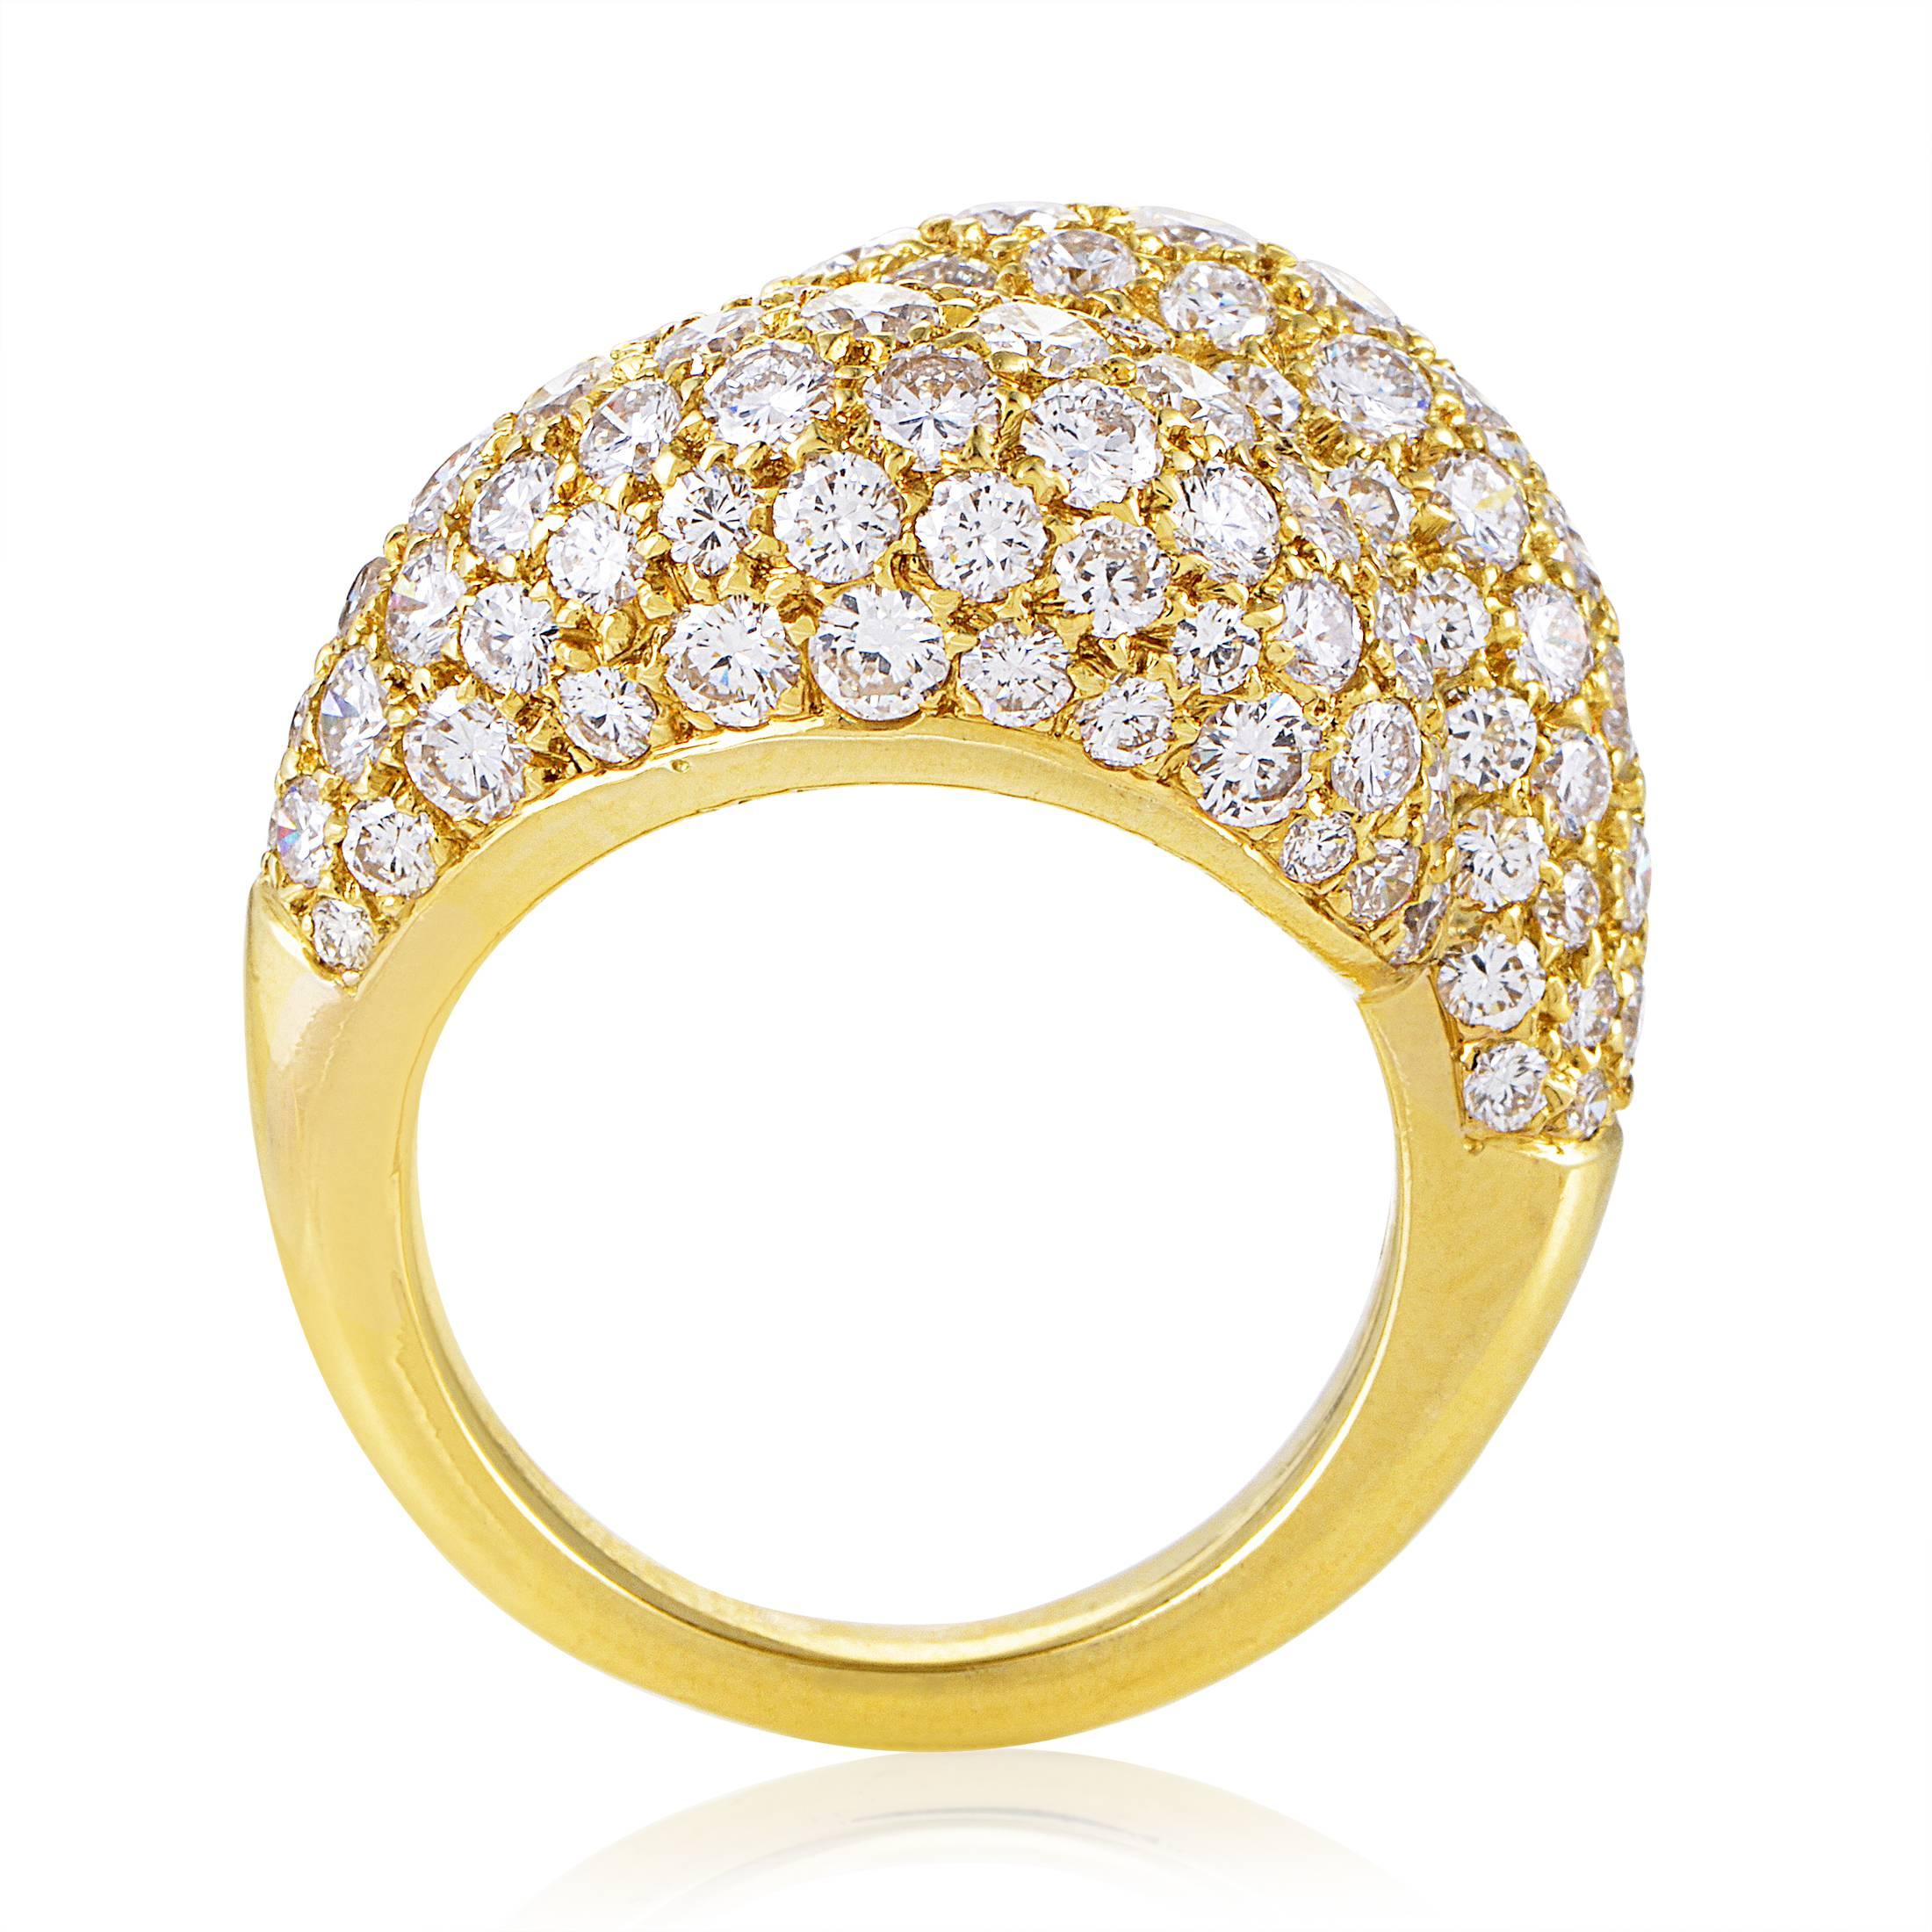 A sight of sheer glamour and flamboyant prestige that relies on excellence and taste, this astonishing 18K yellow gold ring from Van Cleef & Arpels boasts a mesmerizing arrangement of glistening F-color diamonds of VVS clarity weighing in total